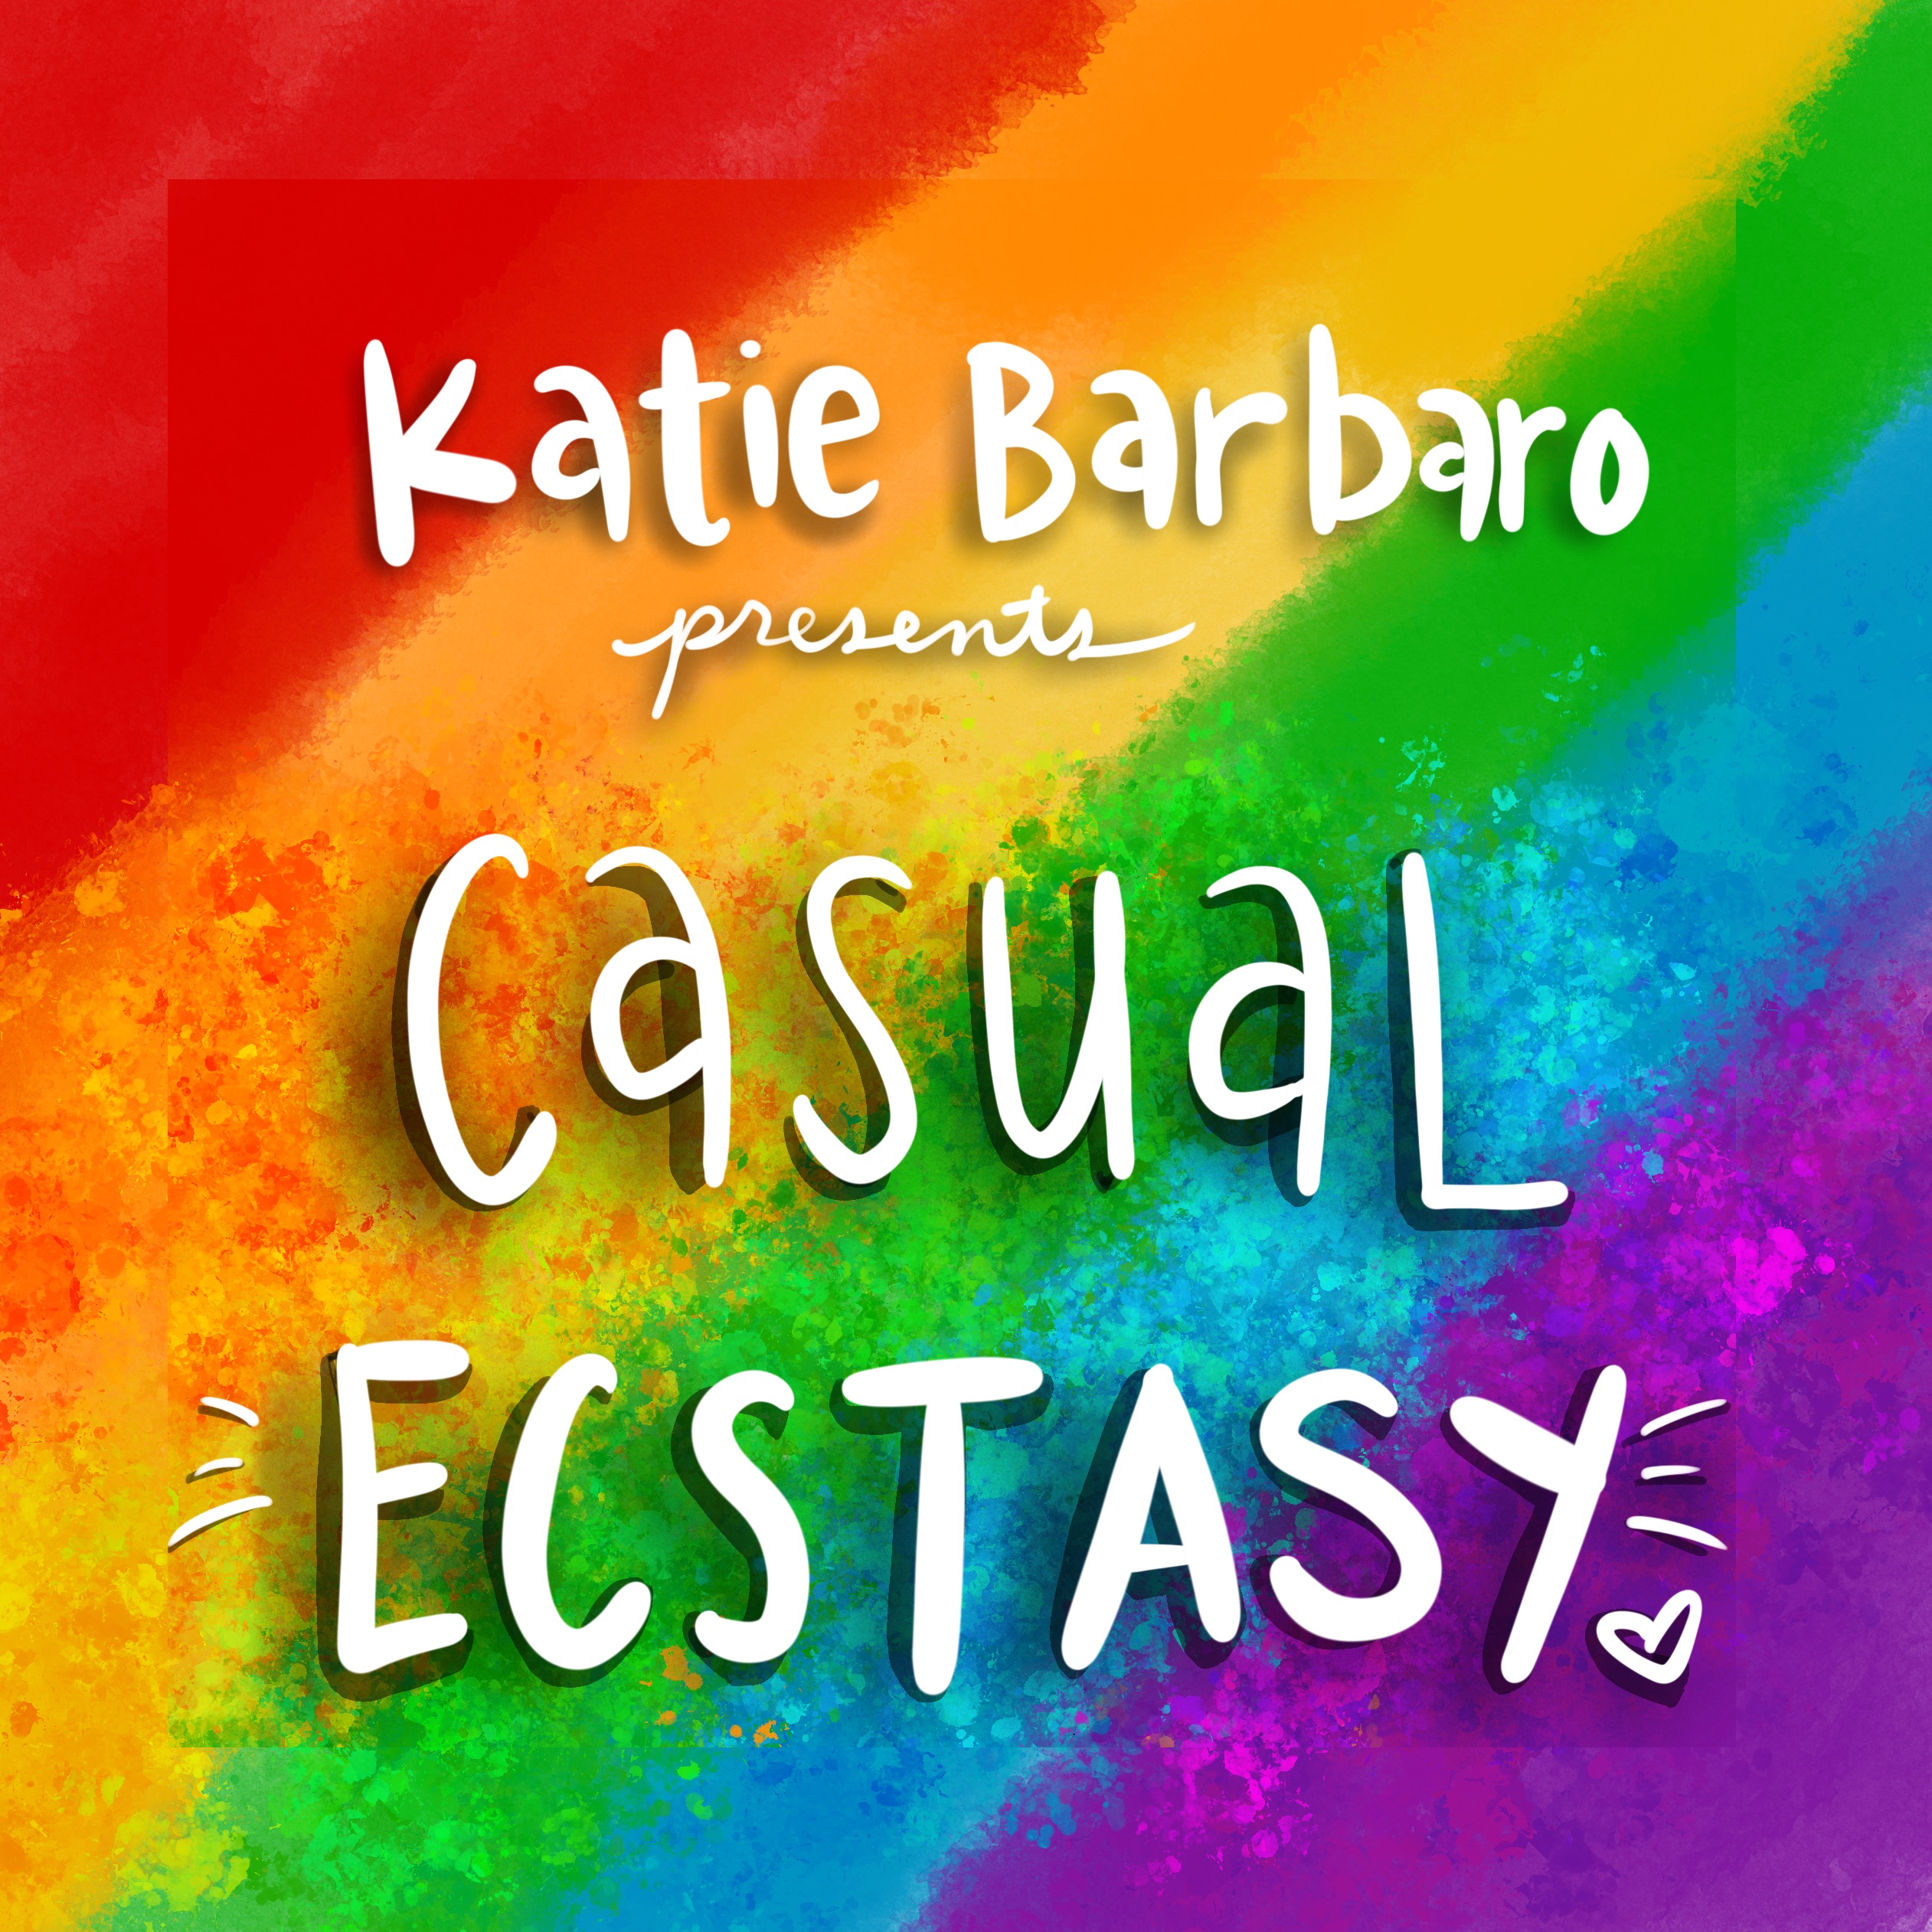 Casual Ecstasy with Katie Barbaro